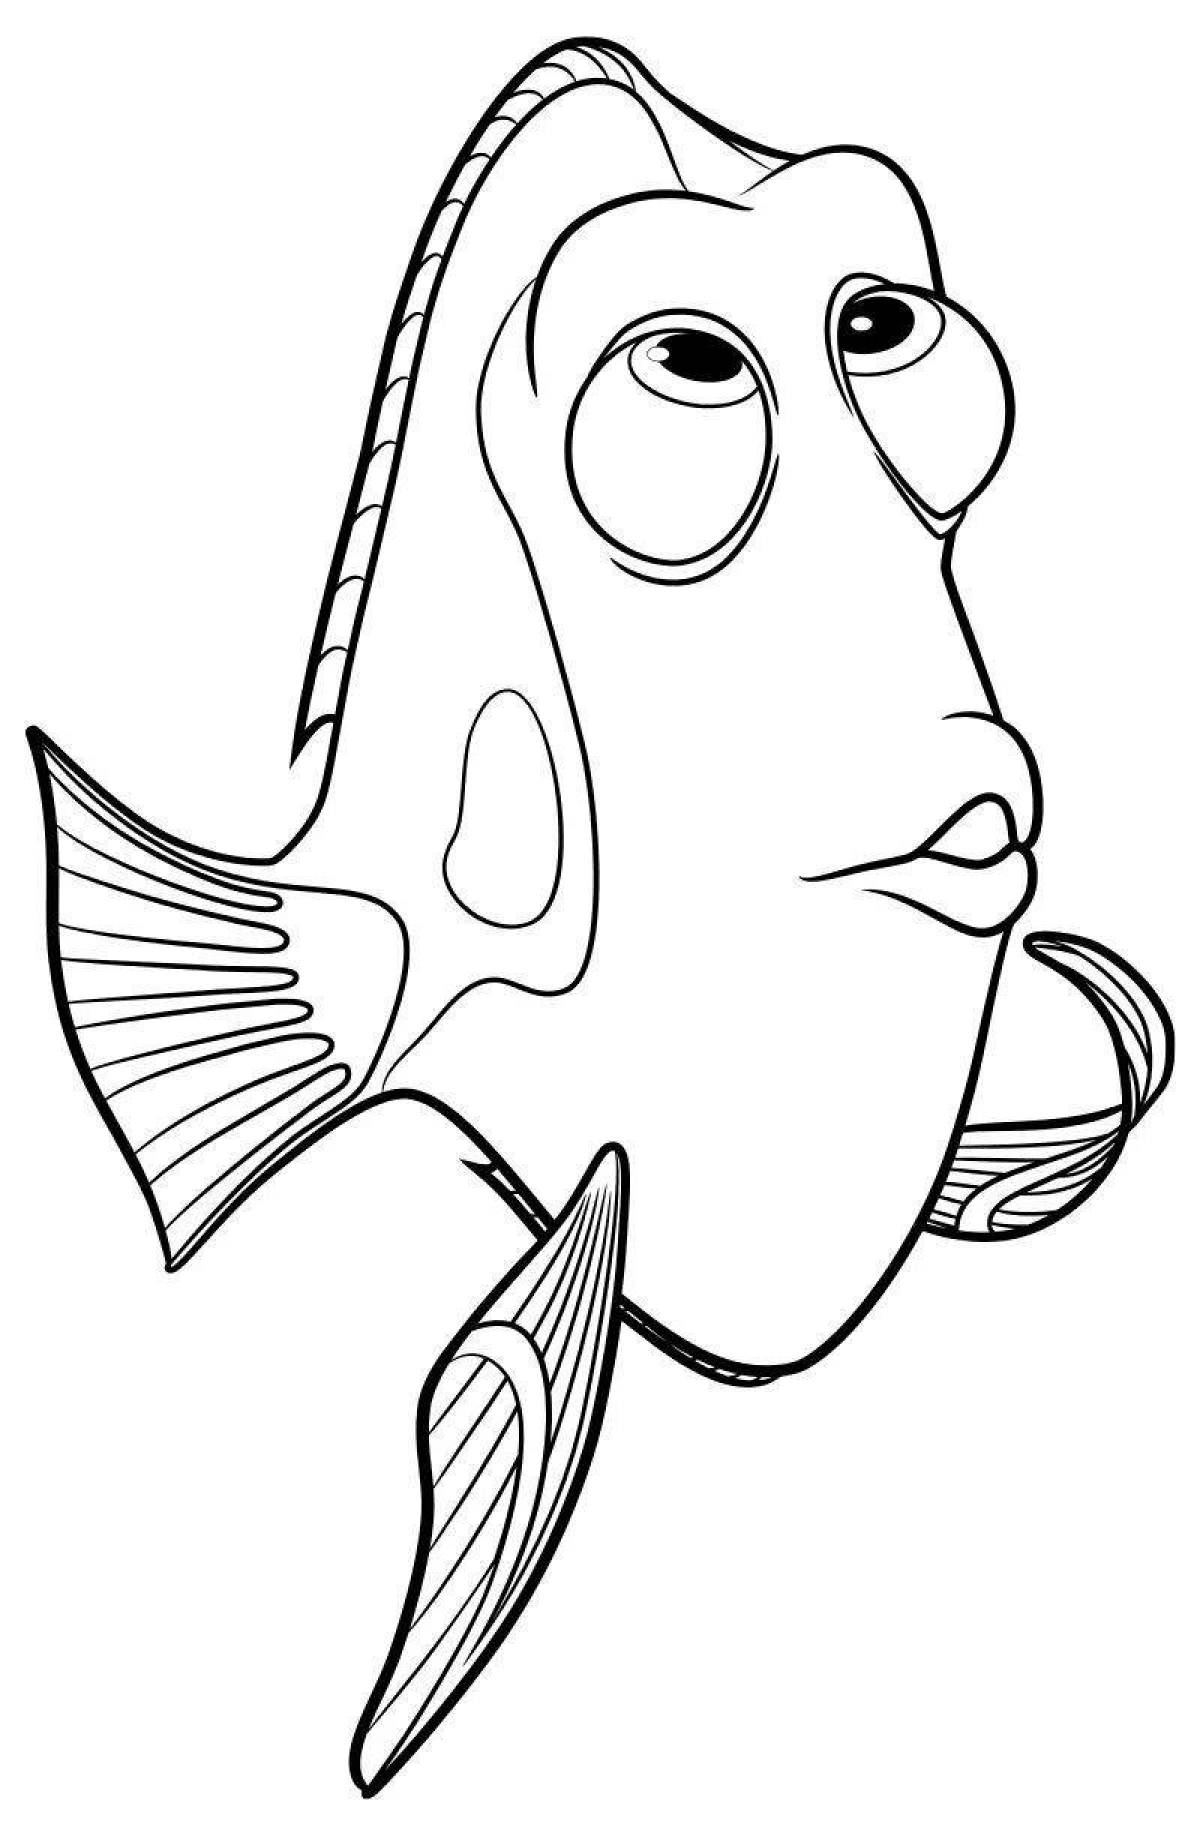 Adorable dory fish coloring book